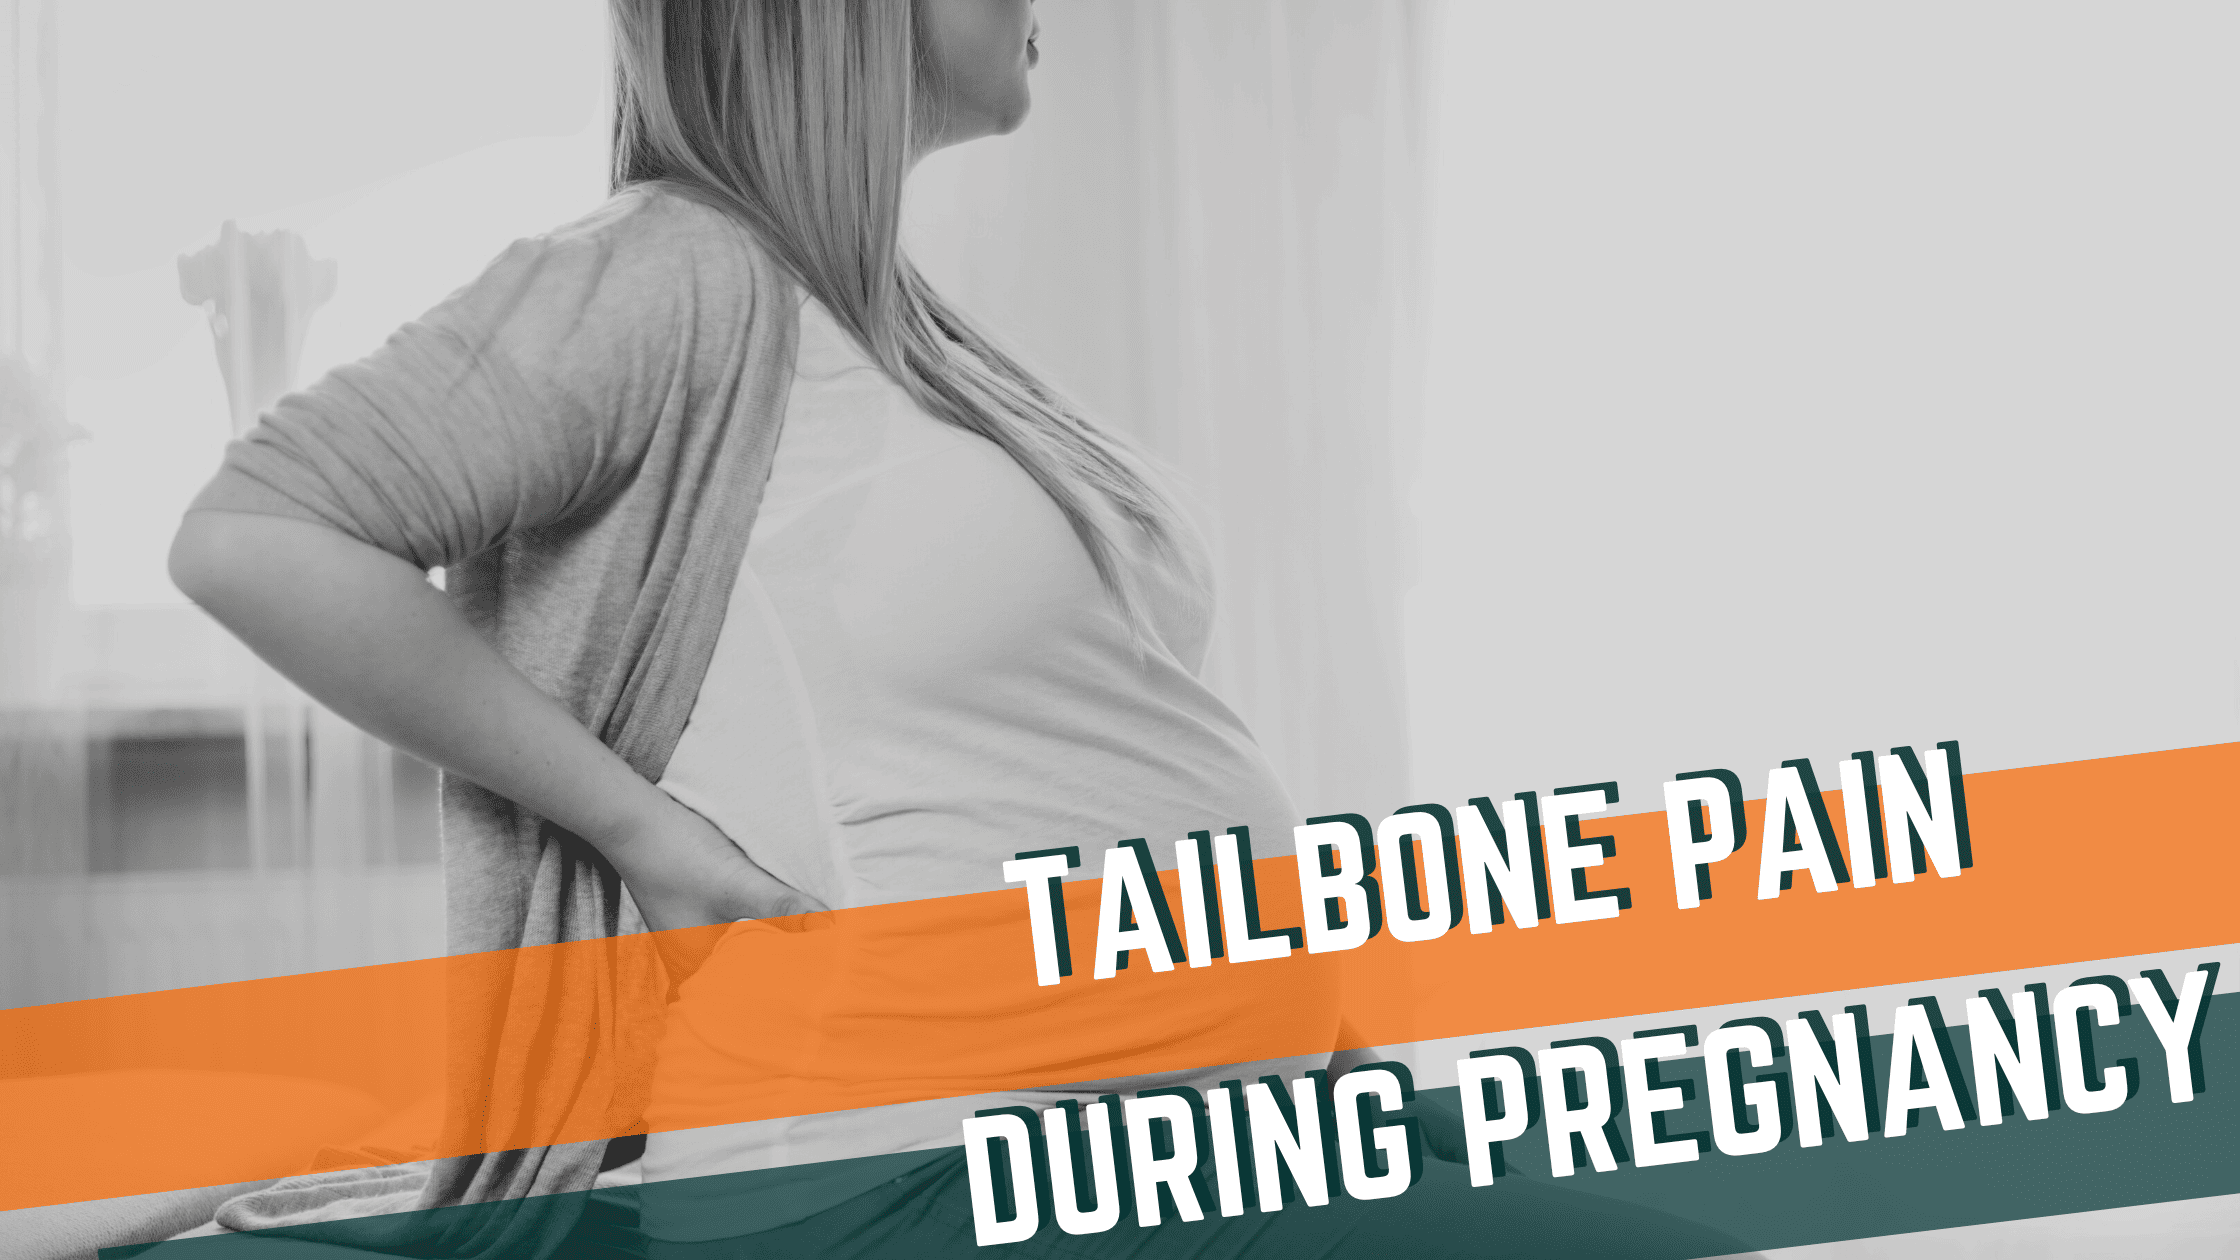 Featured image for “Tailbone Pain During Pregnancy”